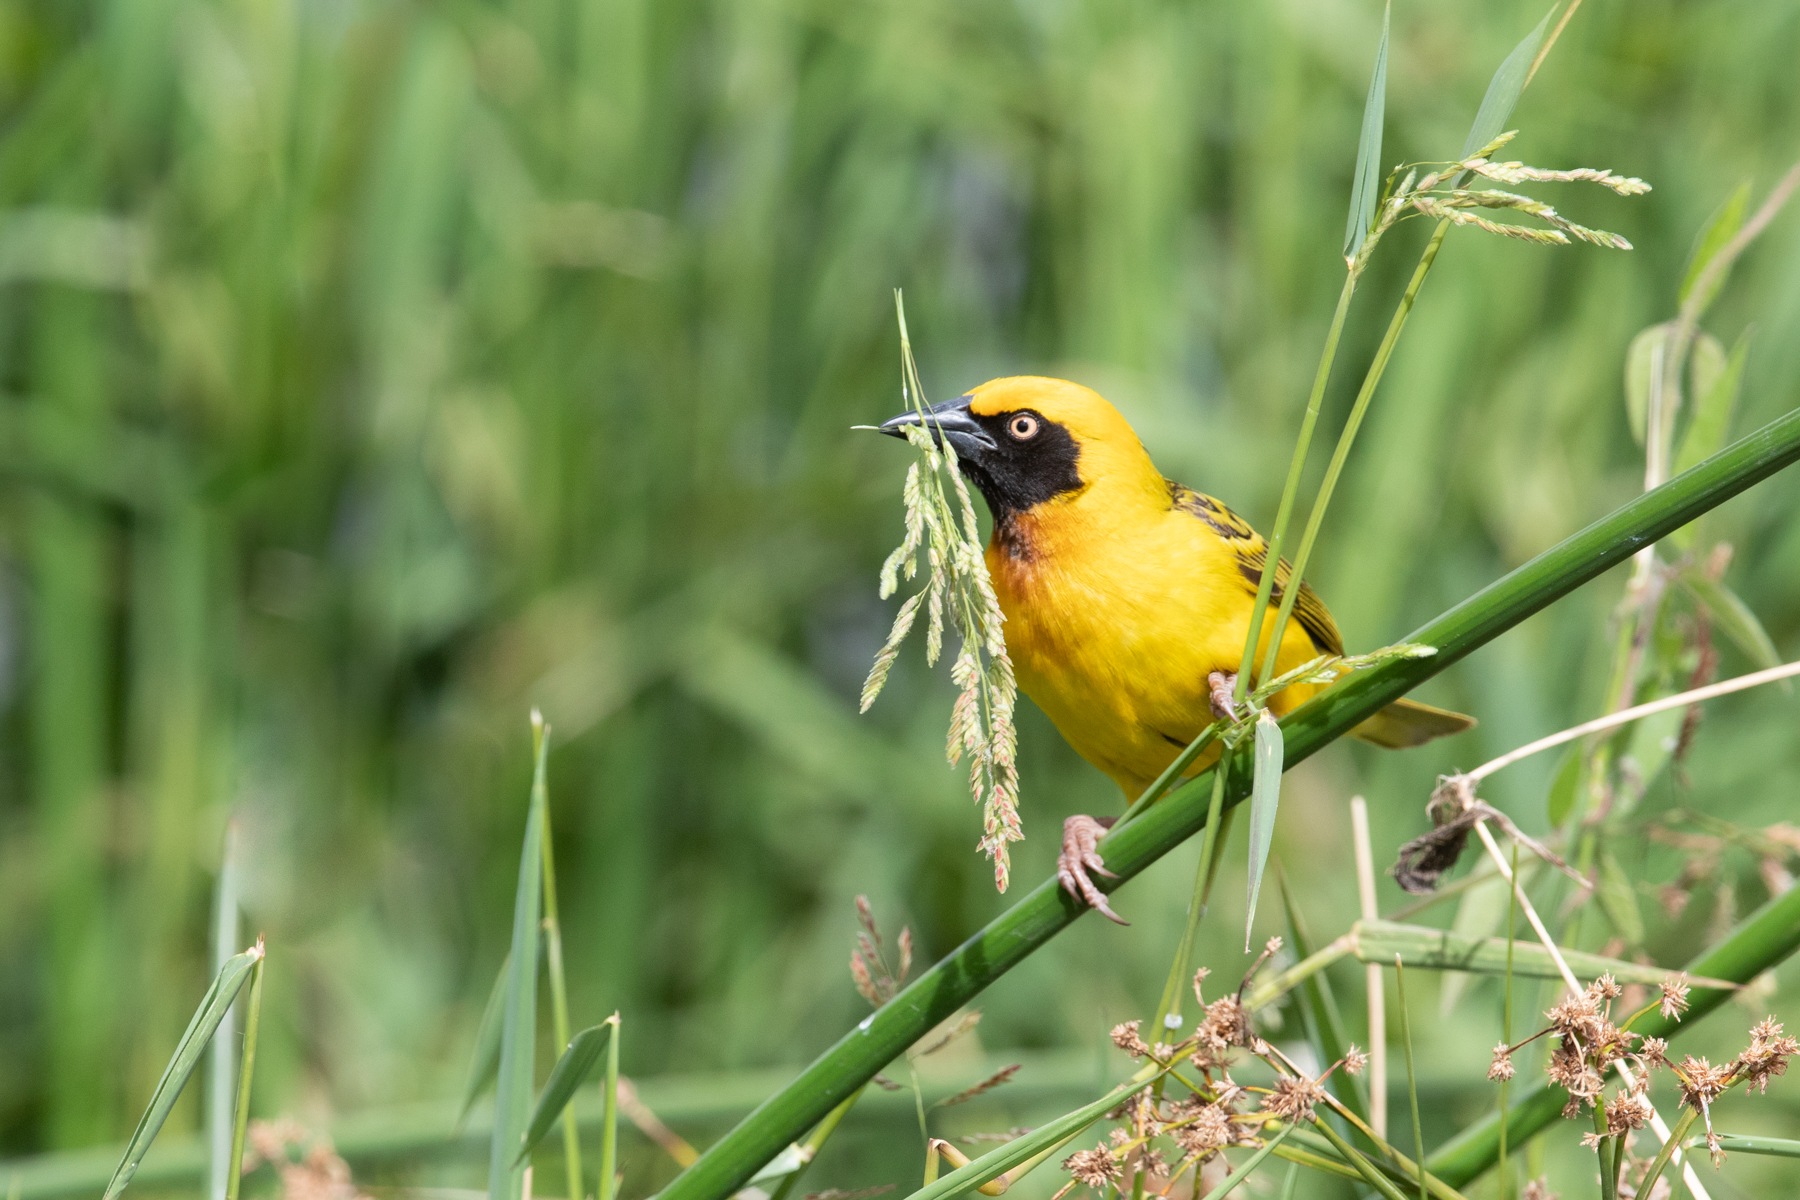 A Speke's Weaver clips off a grass flower to build its nest